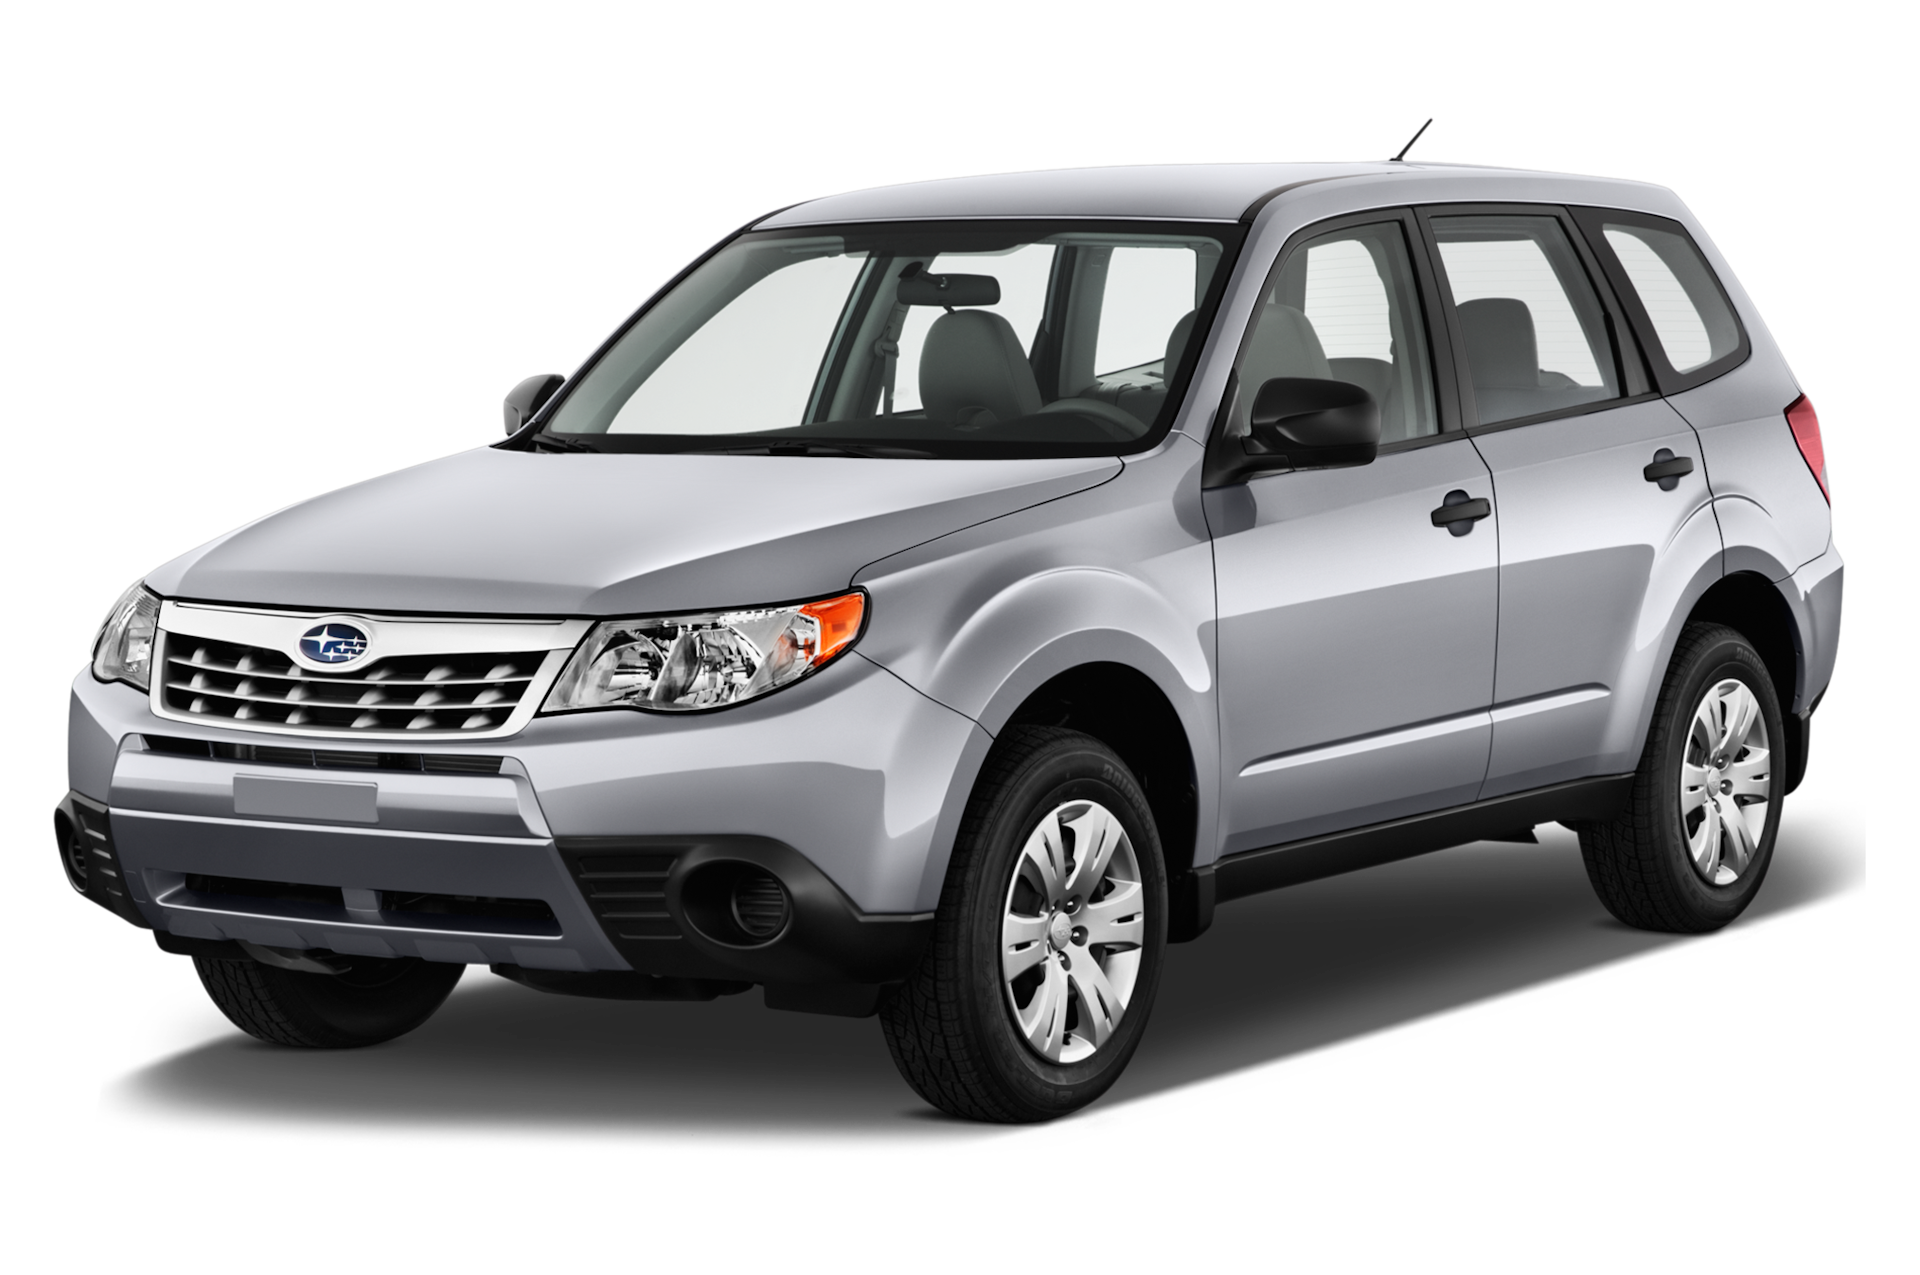 2011 Subaru Forester Prices, Reviews, and Photos - MotorTrend